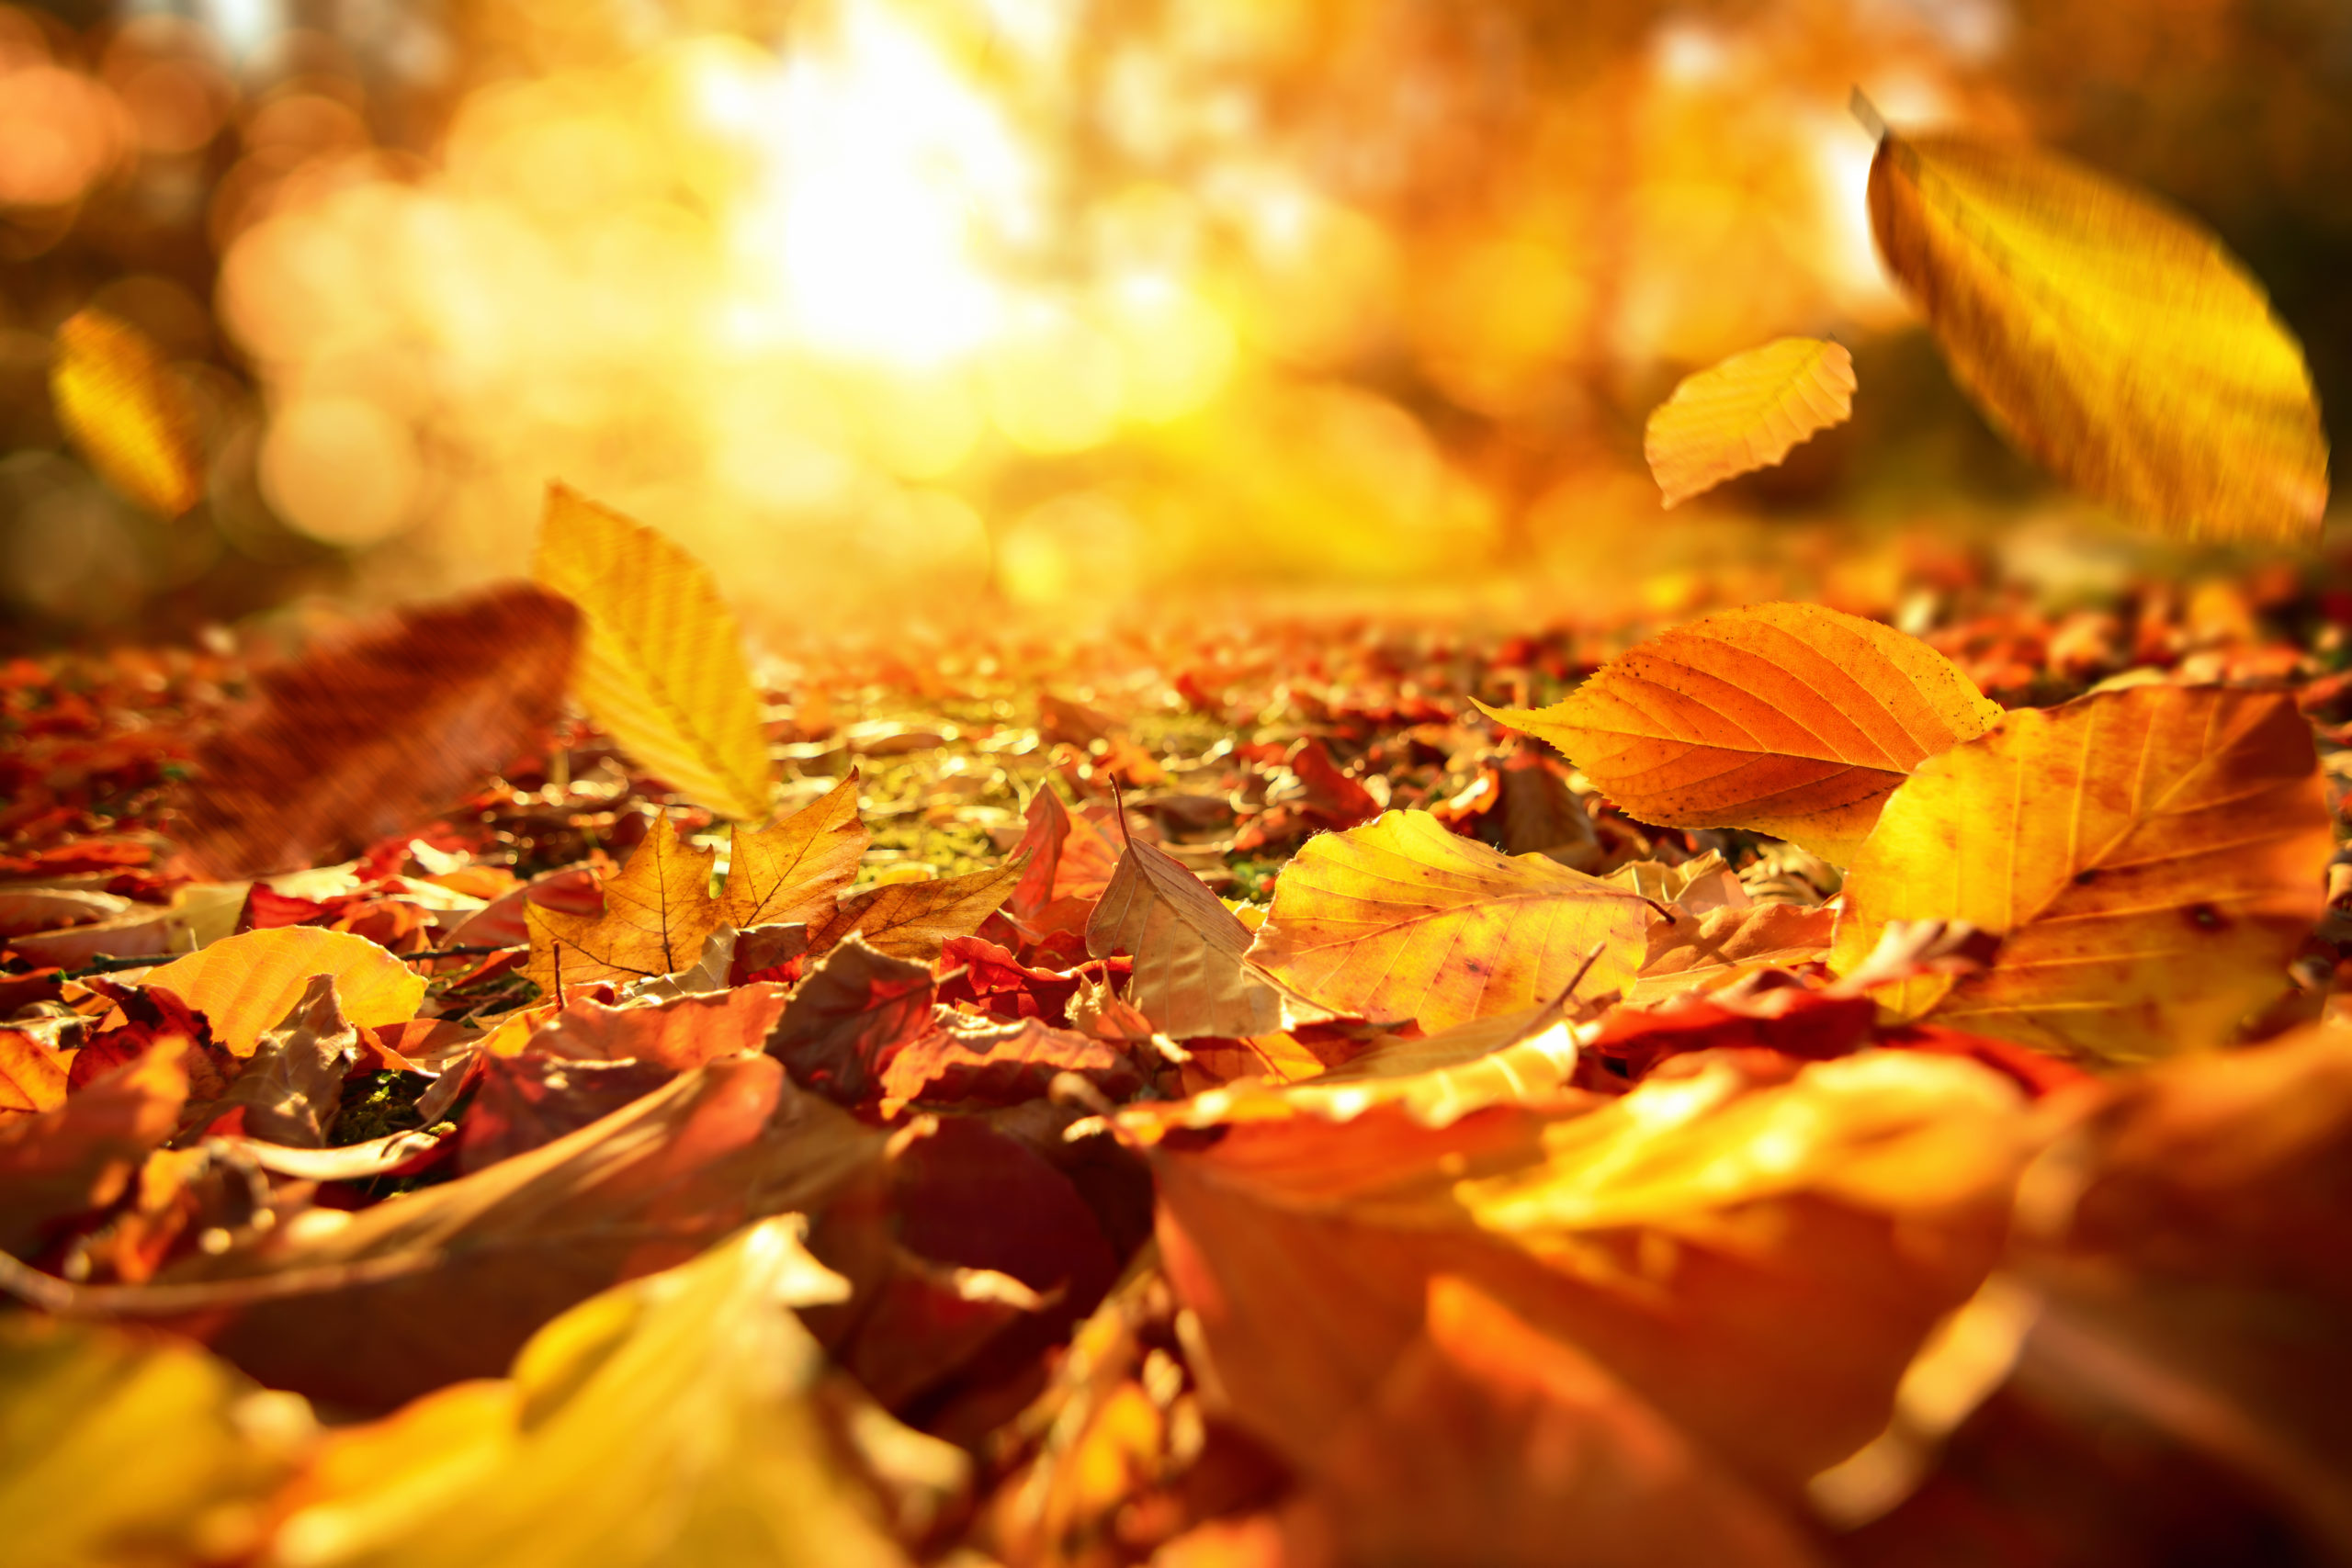 Falling Autumn leaves in lively sunlight